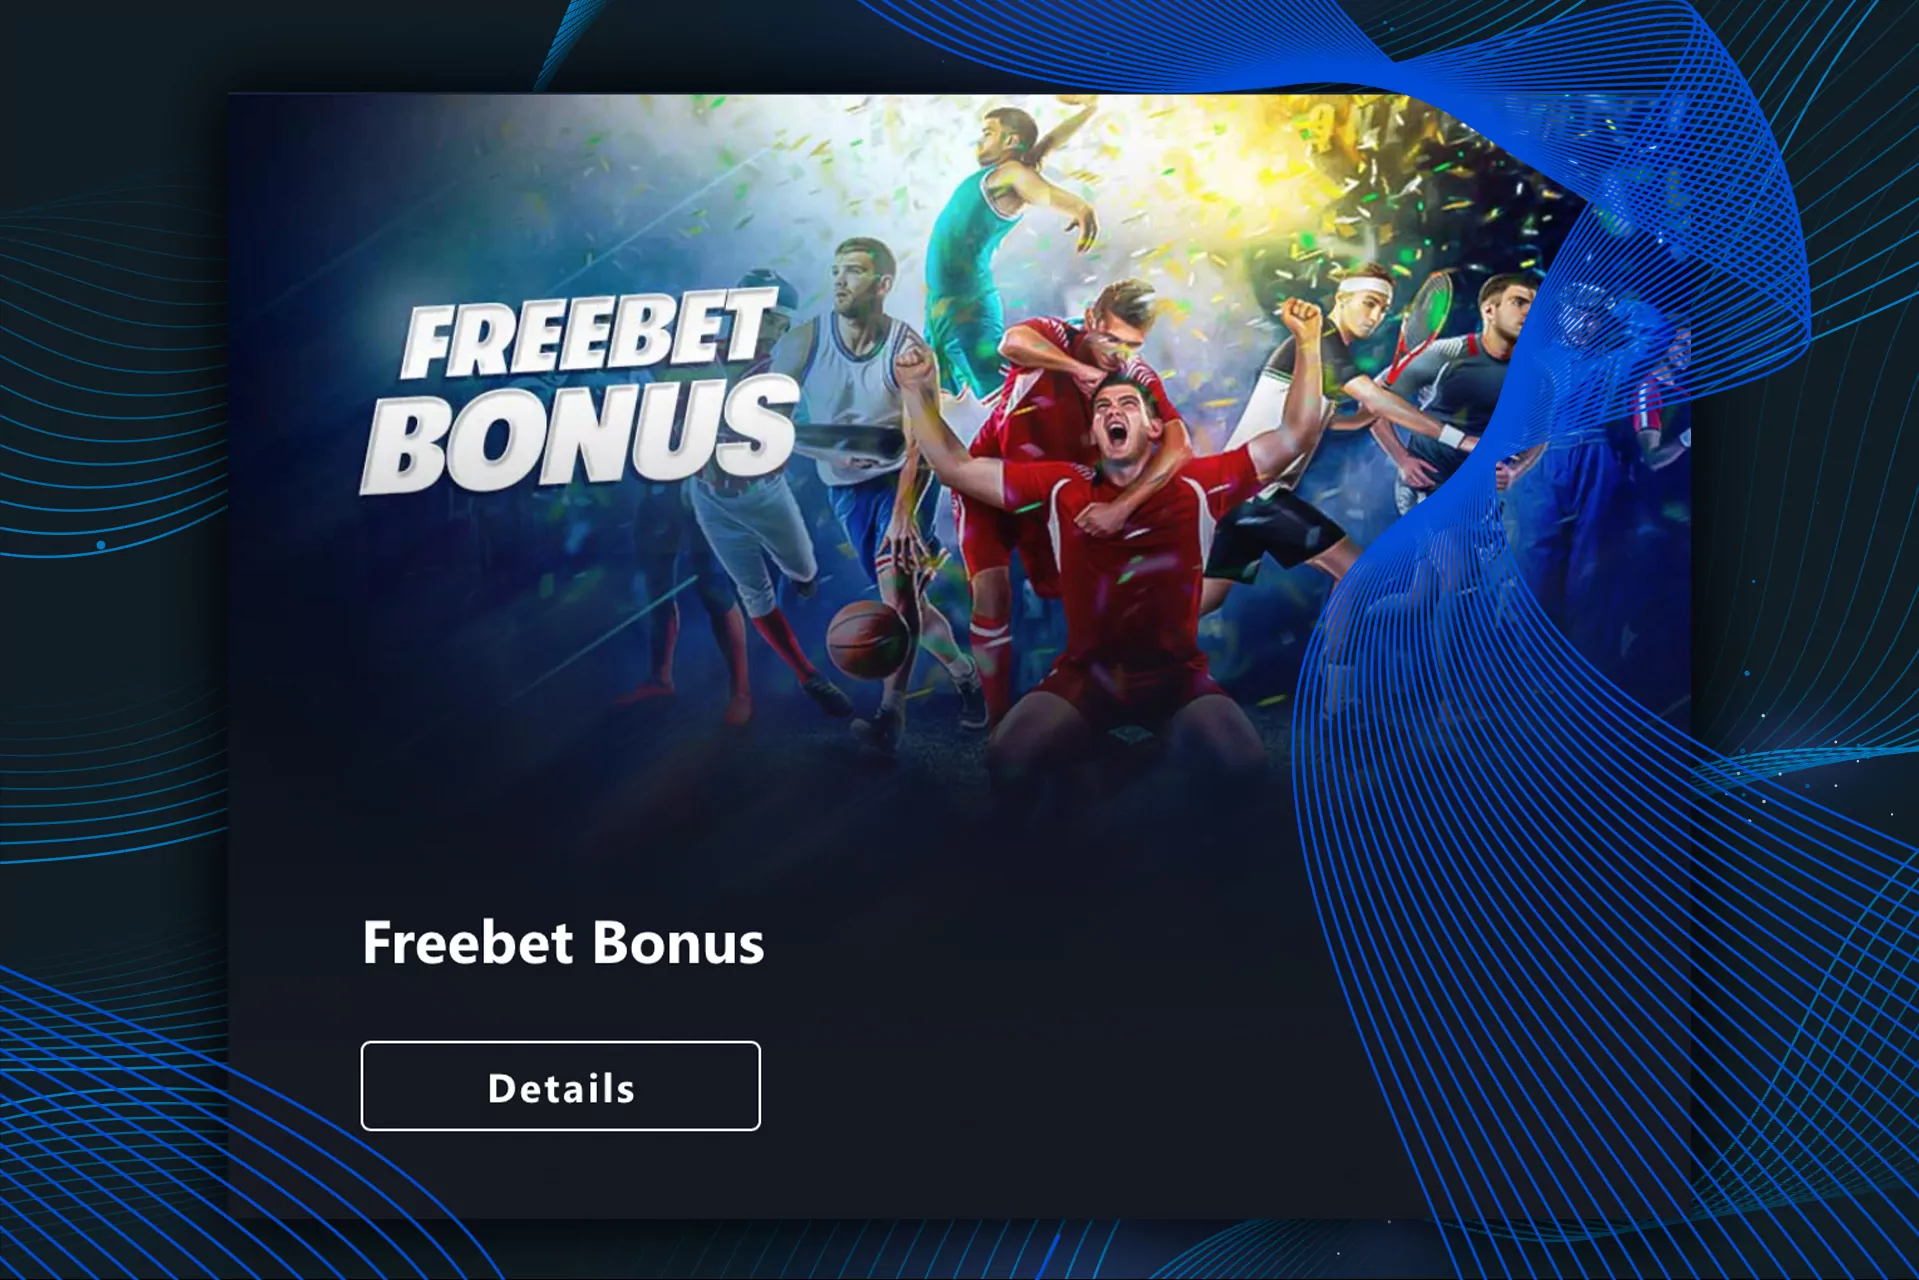 But Free bets is not our regular promotion, when it appears you can find it in the bonuses section.